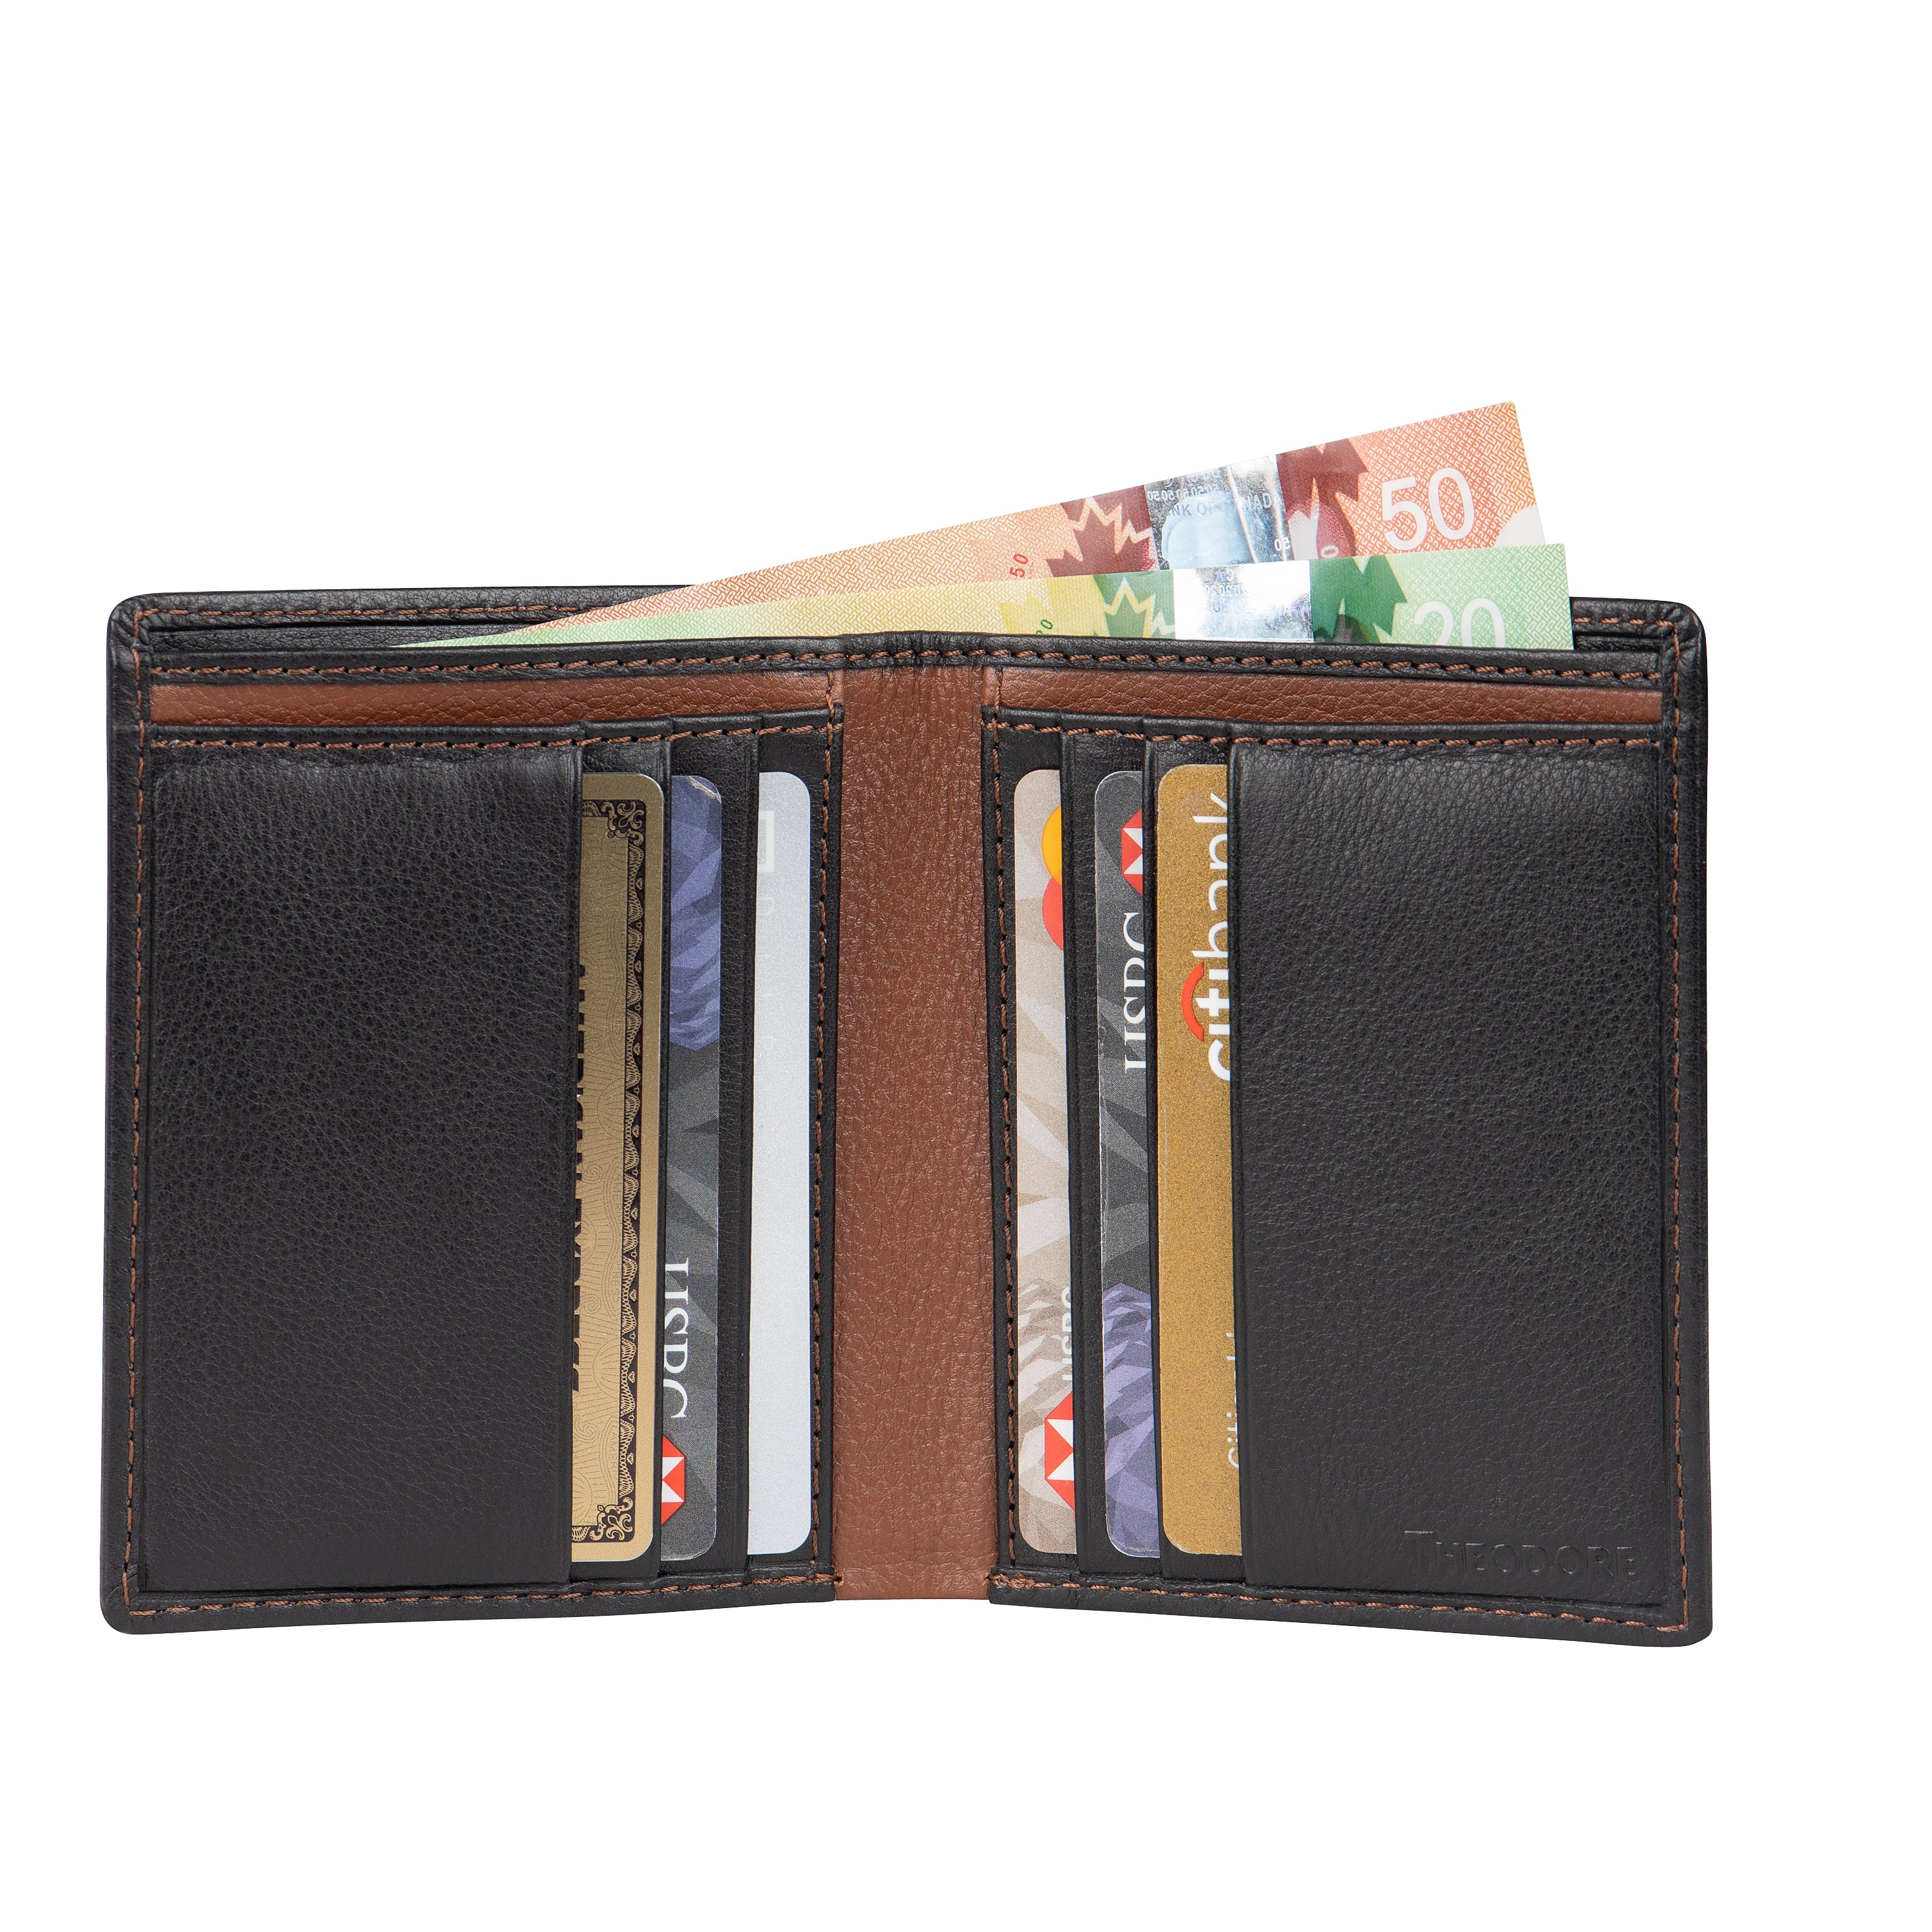 Mens Luxury Leather Soft Wallet Credit Card Holder Purse Black Brown With  Zip